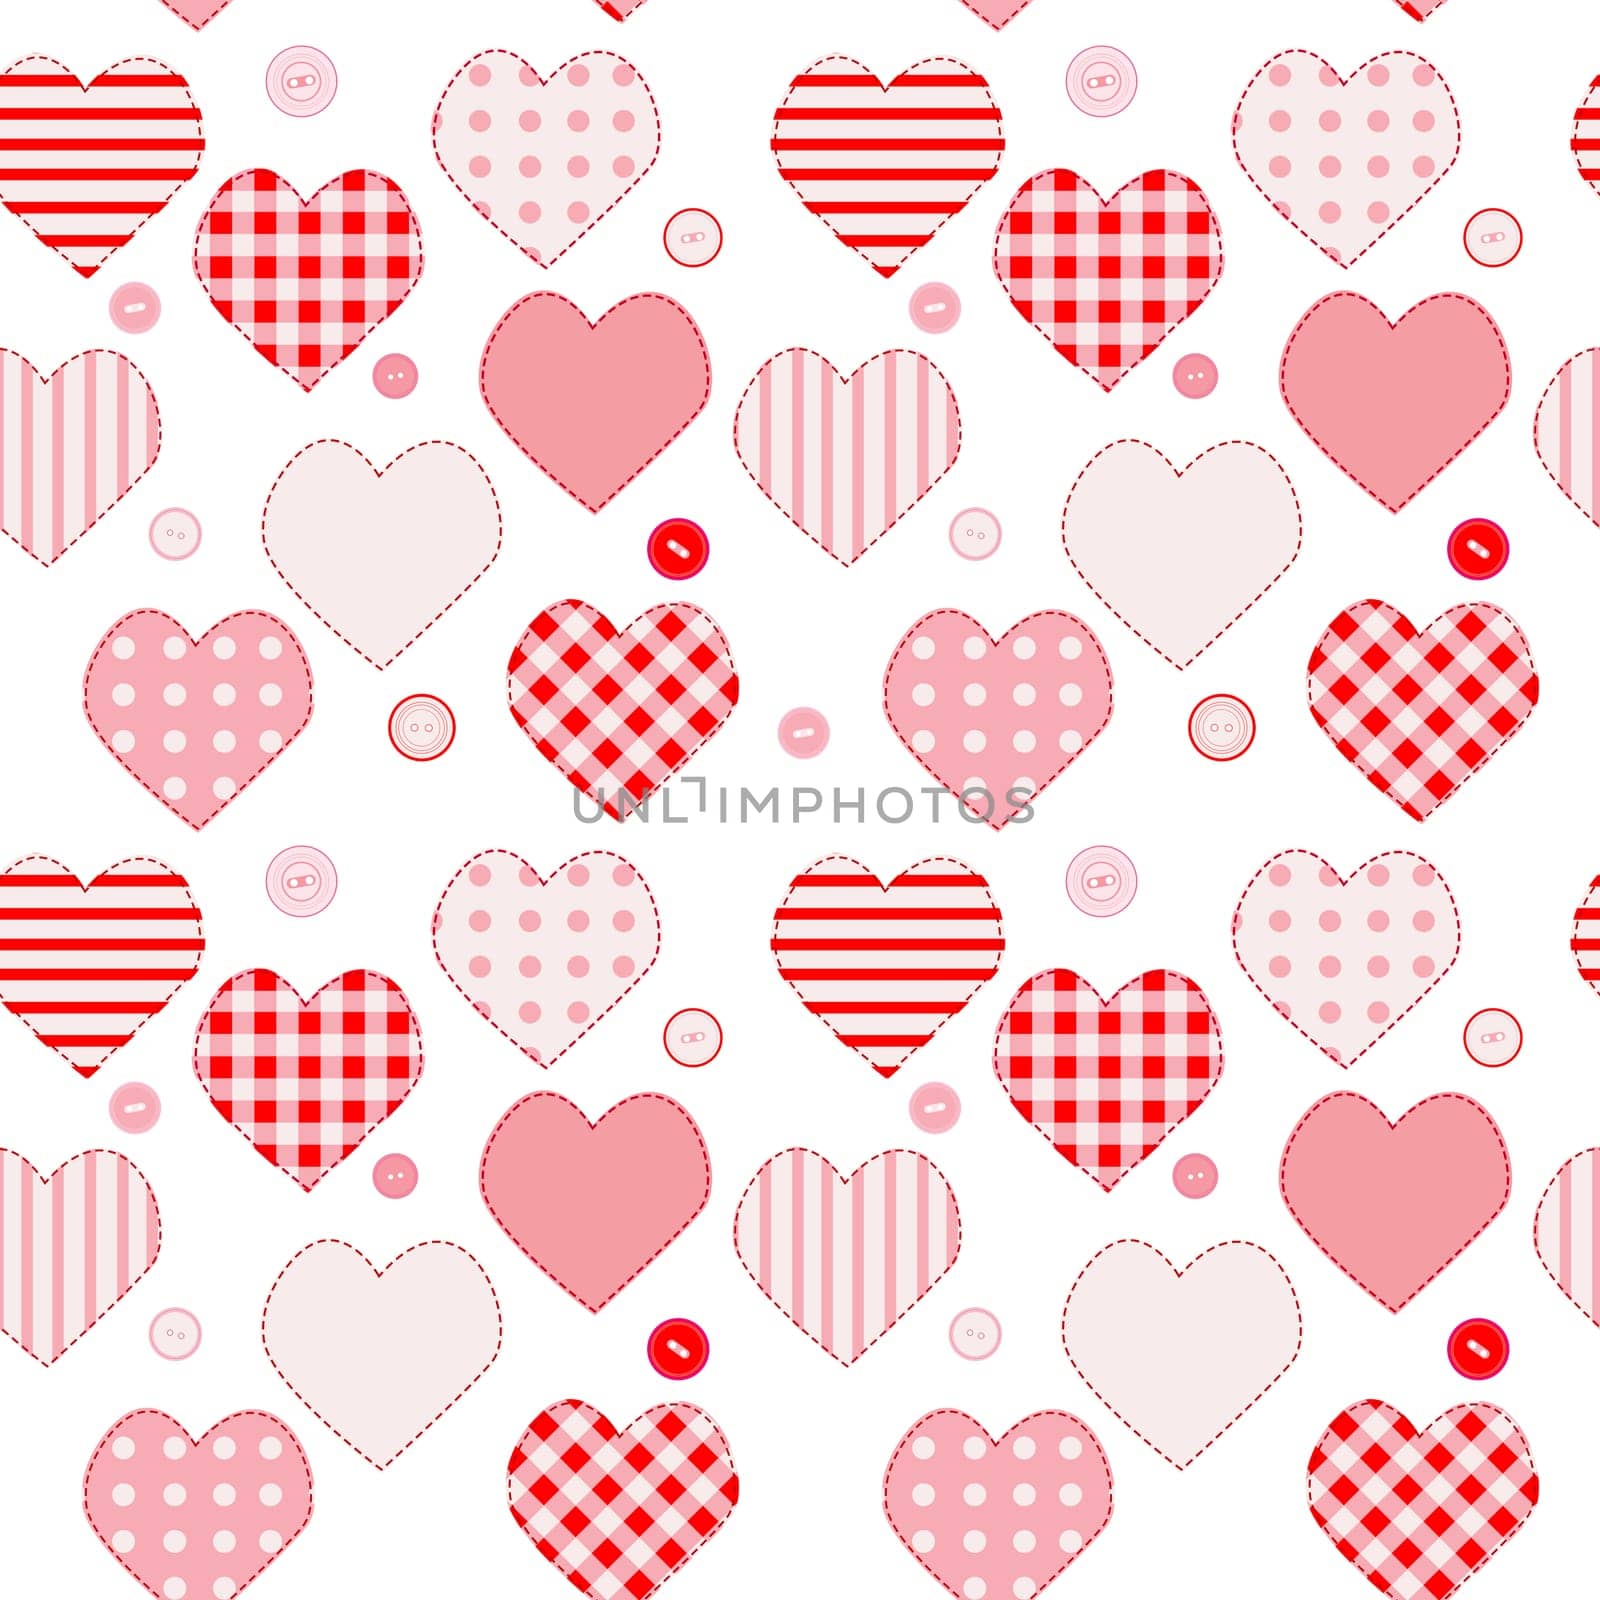 Cute seamless love pattern with pink patchwork hearts and buttons by hibrida13